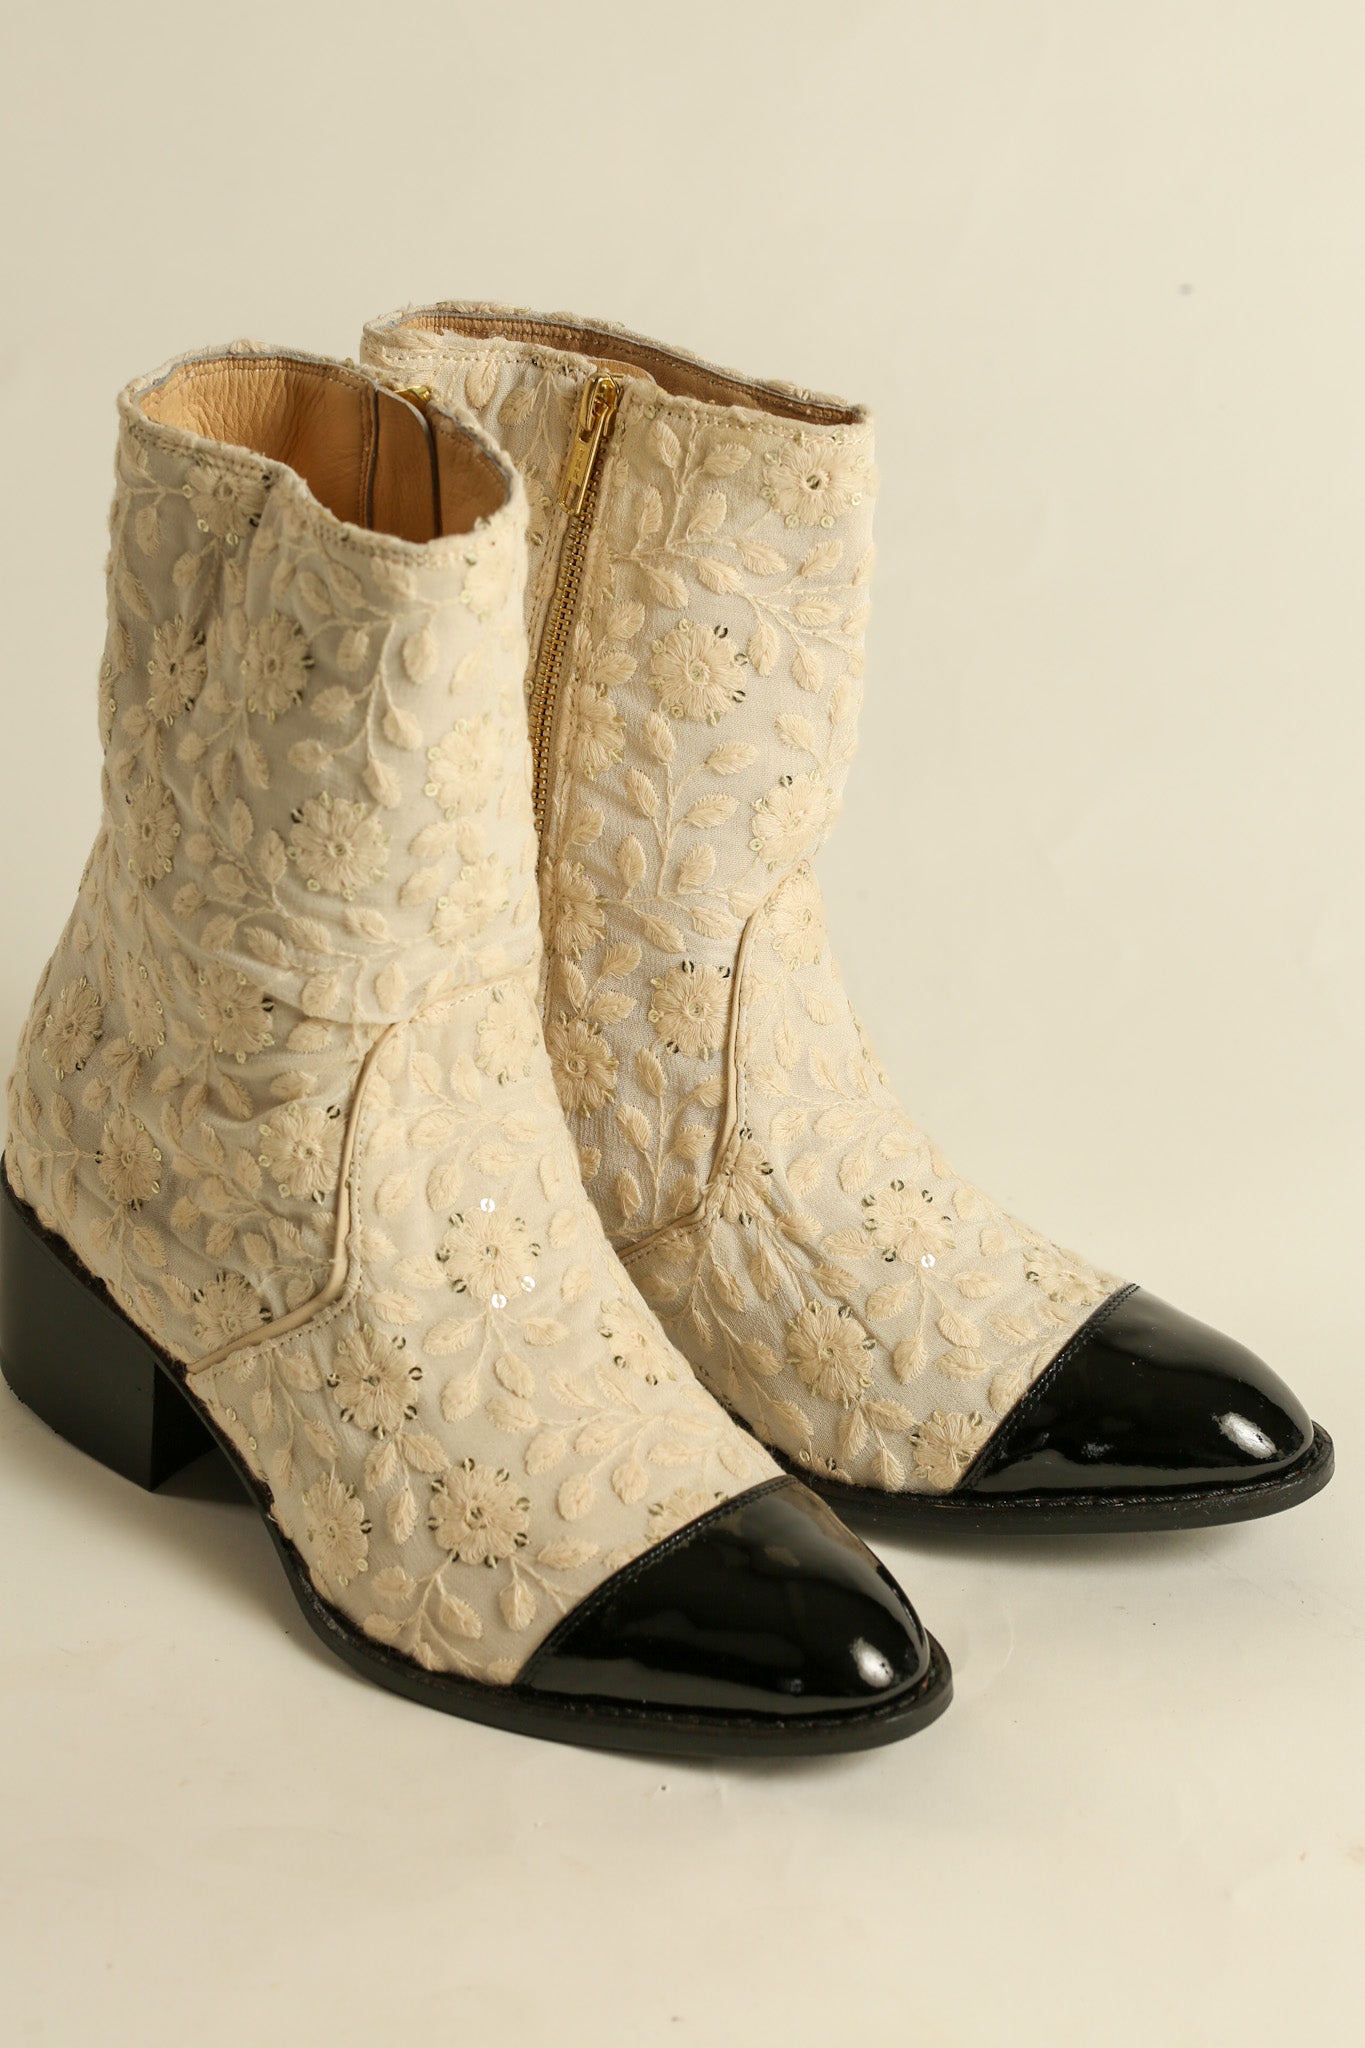 EMBROIDERED SILK PATENT BLACK CAP BOOTS COCOCHA - BANGKOK TAILOR CLOTHING STORE - HANDMADE CLOTHING